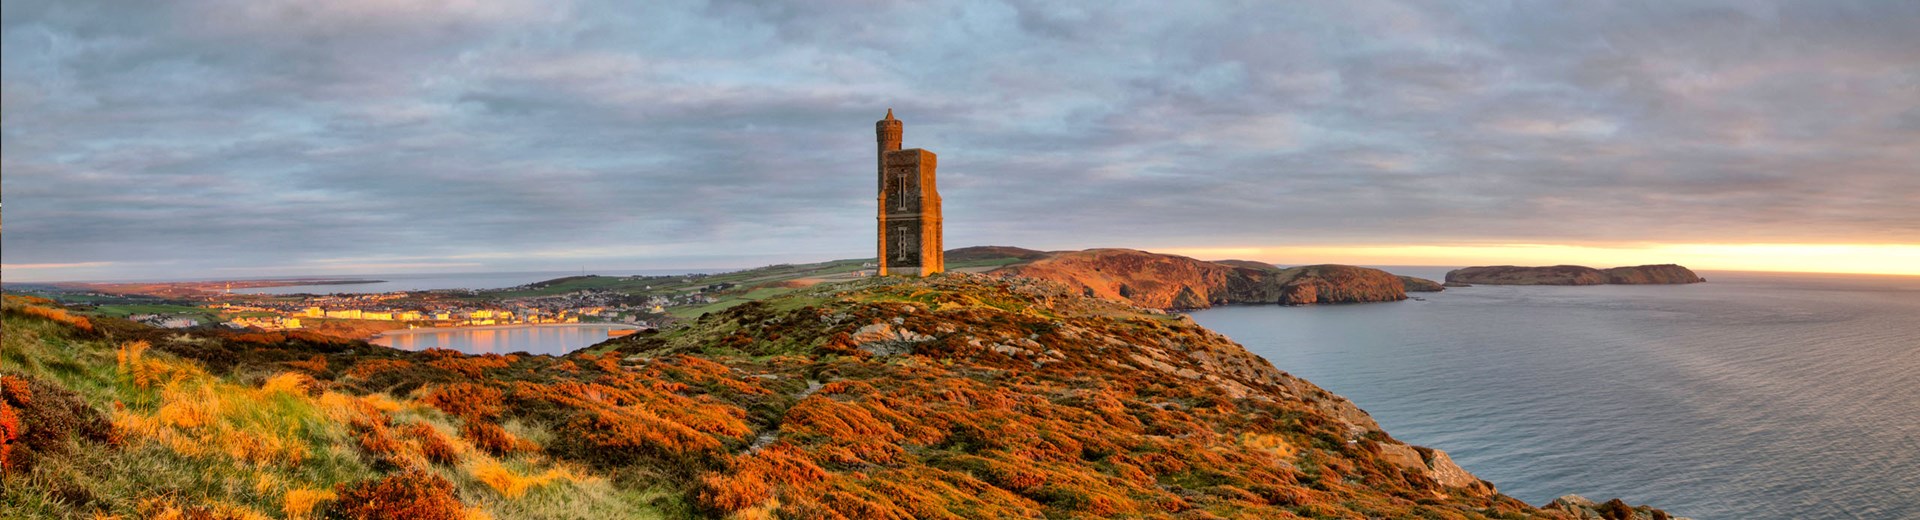 A tower on a hill at sunset. The tower is Corrin's folly on the Isle Of Man